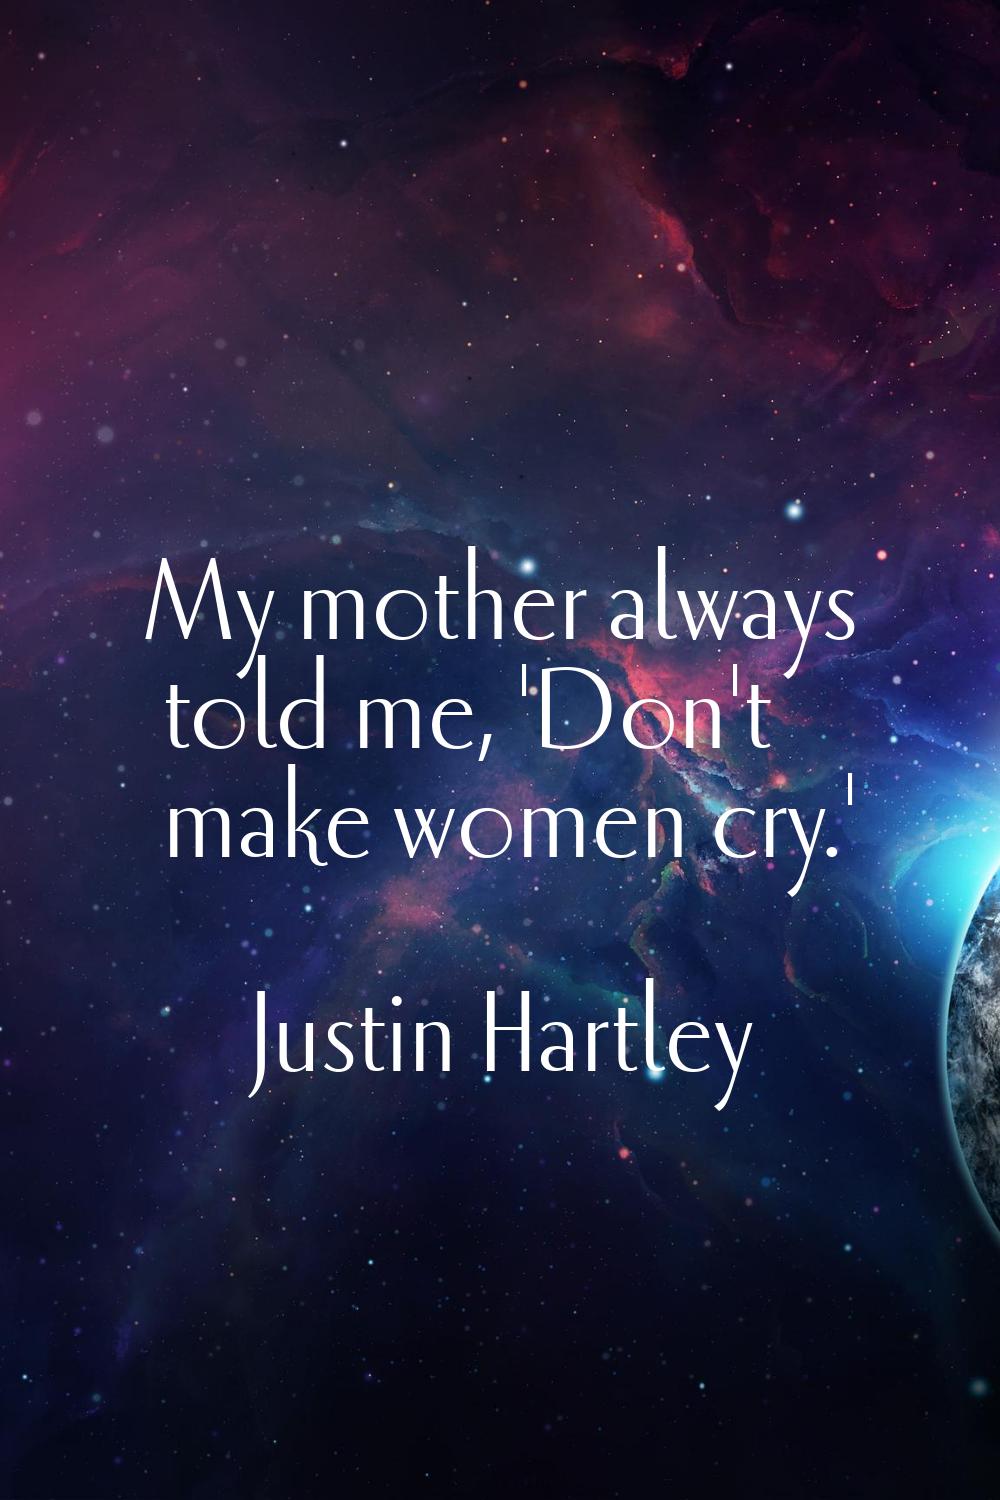 My mother always told me, 'Don't make women cry.'